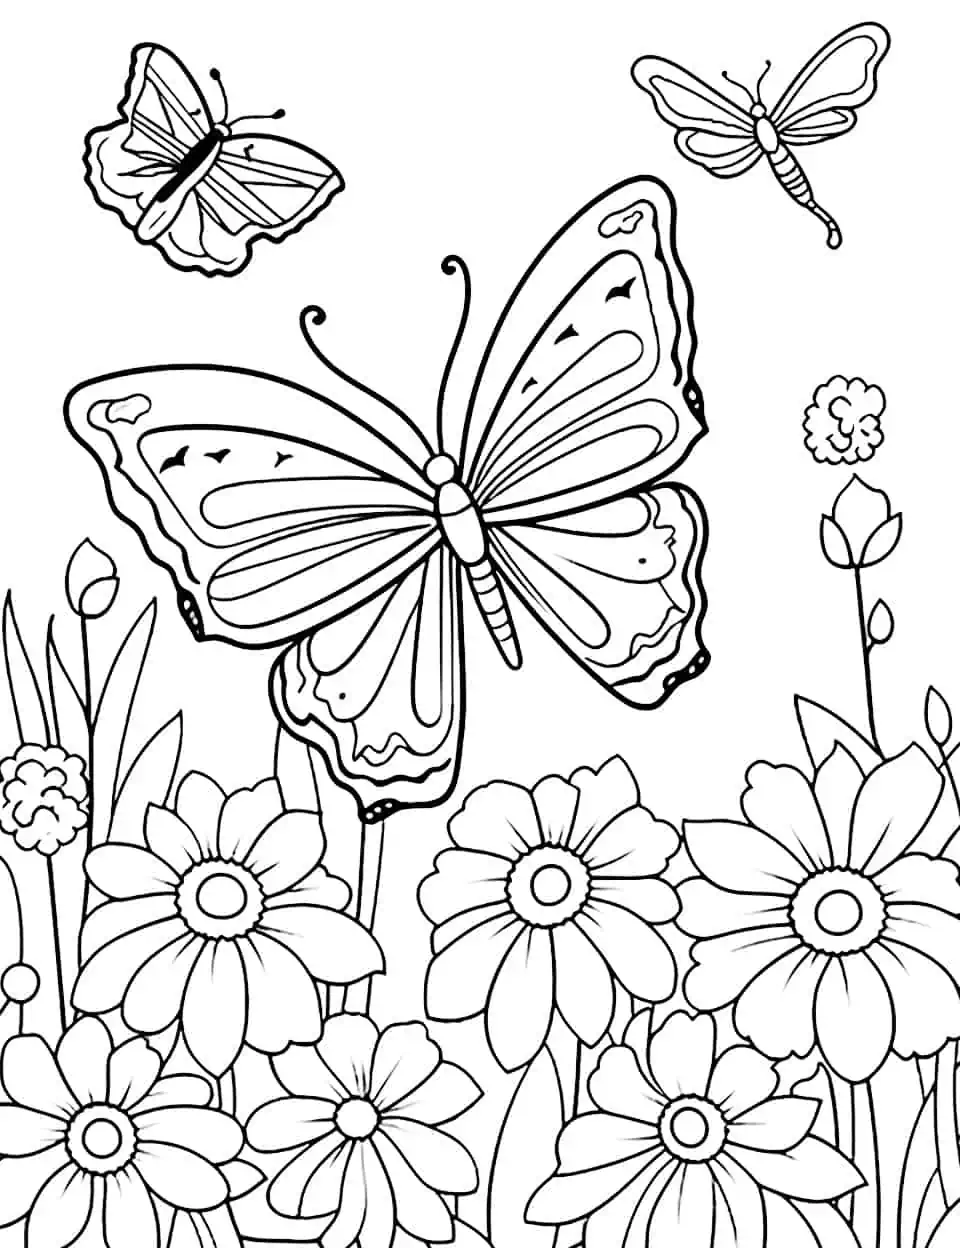 Garden Delight Butterfly Coloring Page - A beautiful coloring page depicting a butterfly gracefully hovering above a bed of colorful flowers.